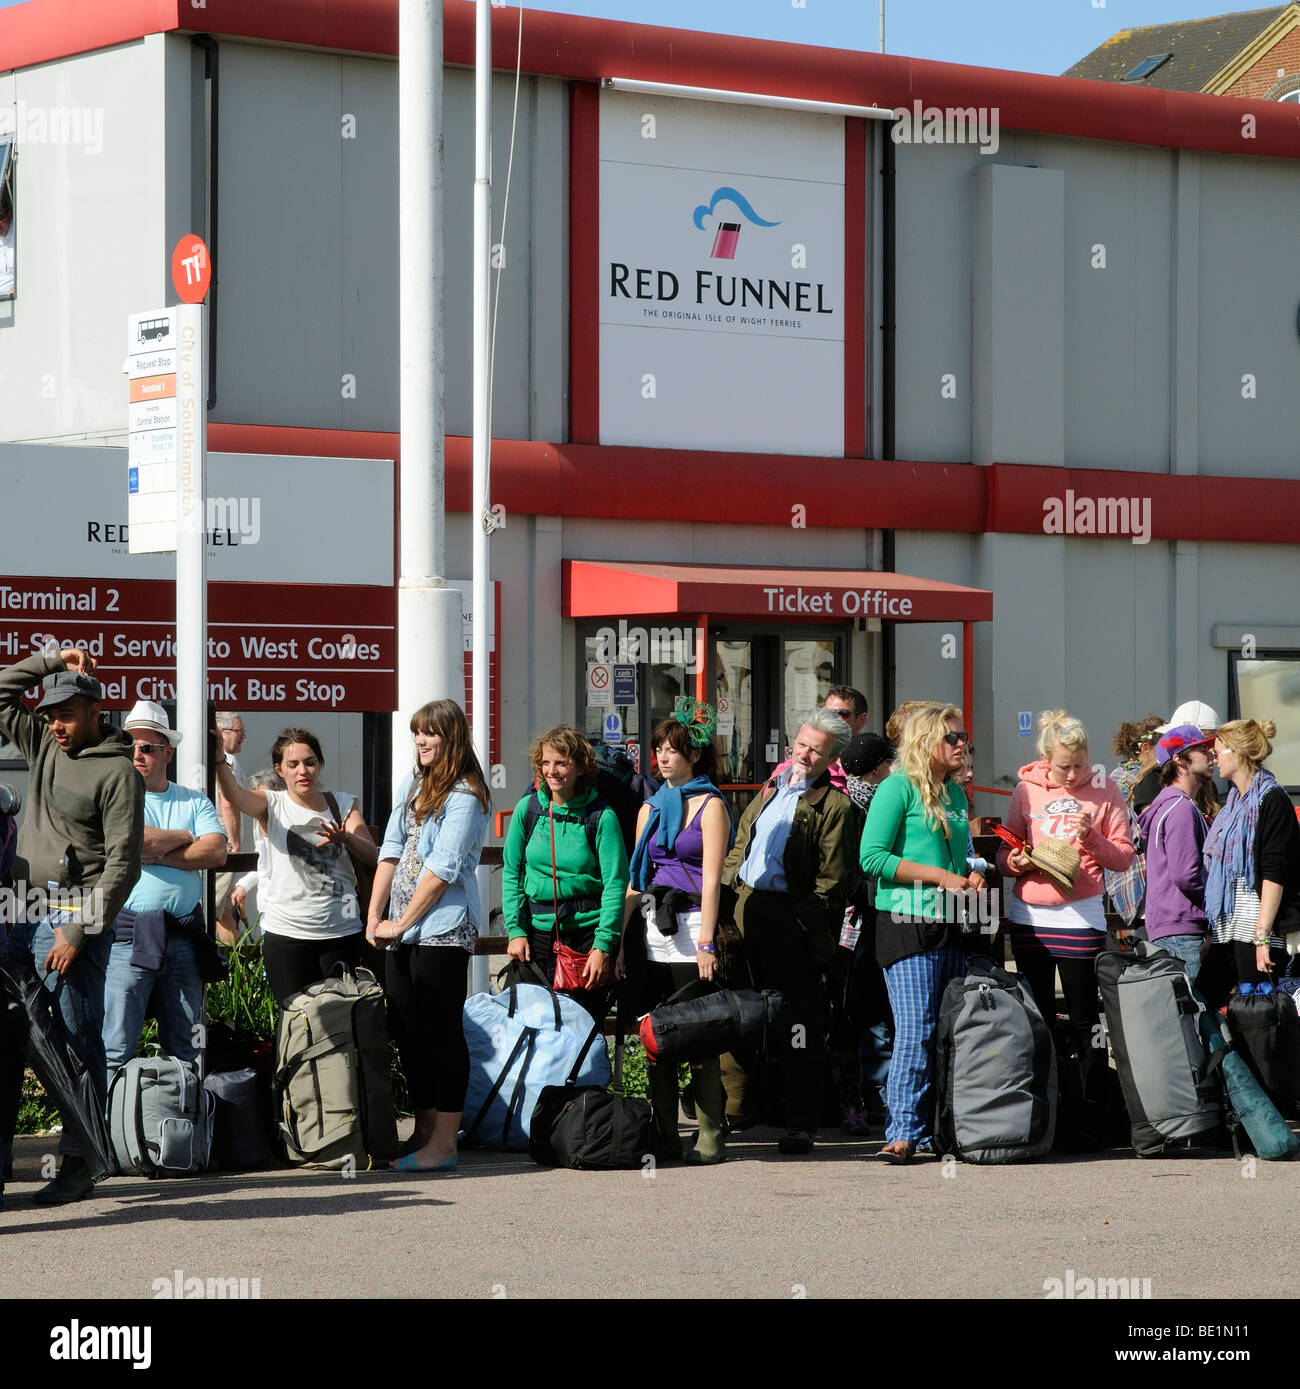 Crowded bus stop outside Red Funnel ferry ticket office and terminal building Southampton England UK Stock Photo